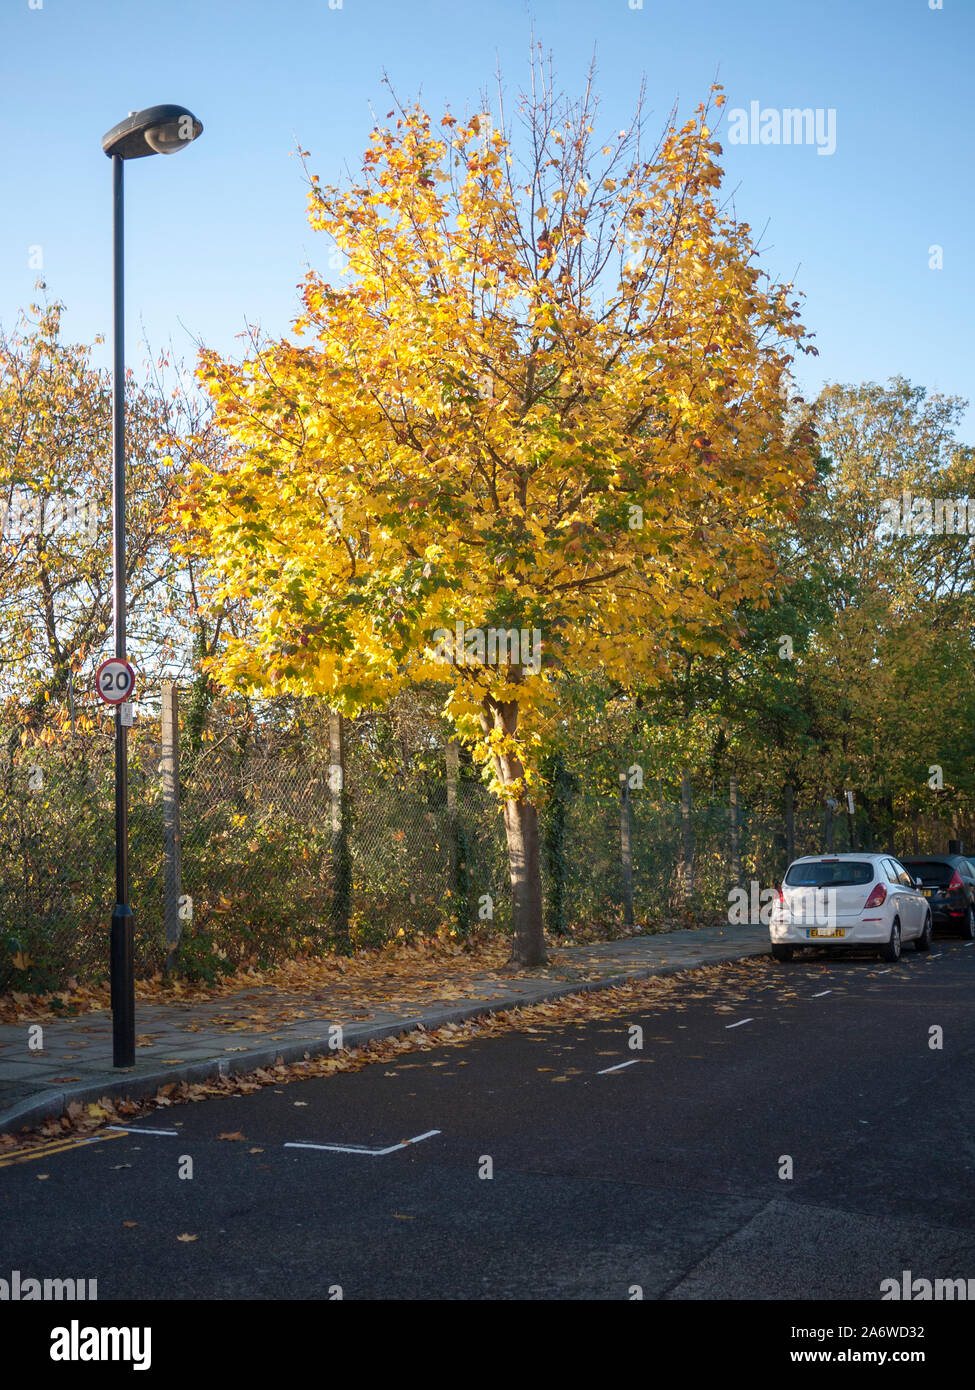 Norway maple (Acer platanoides) street tree, London N19 in the autumn Stock Photo